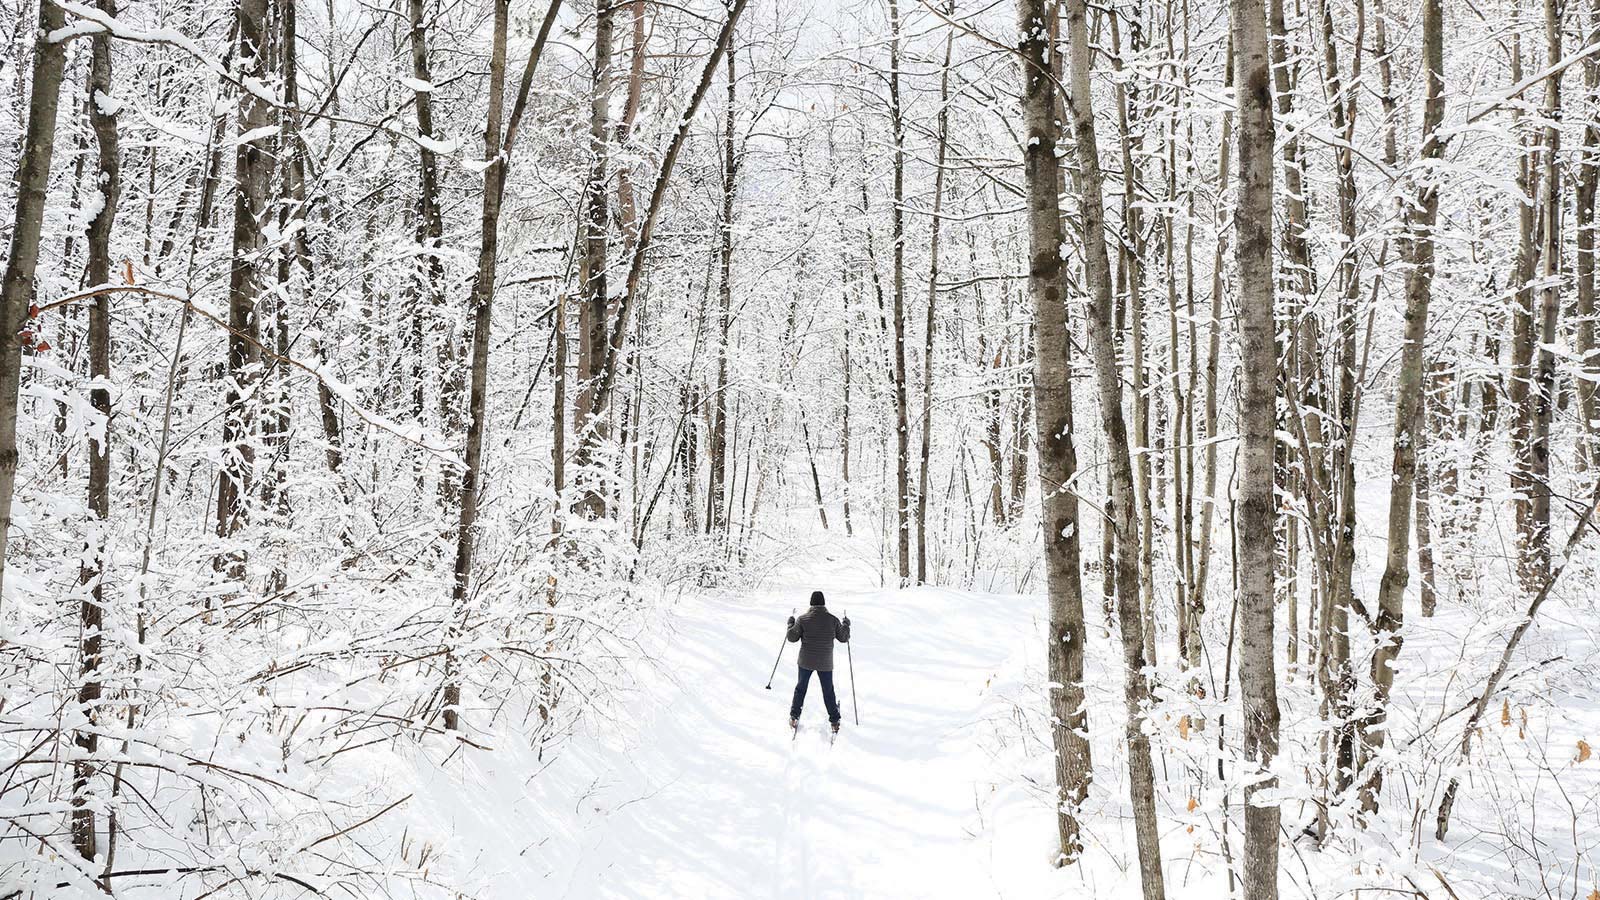 Oneida County’s top cross-country ski trails | Cross-country skier navigating a snow covered trail surrounded by trees